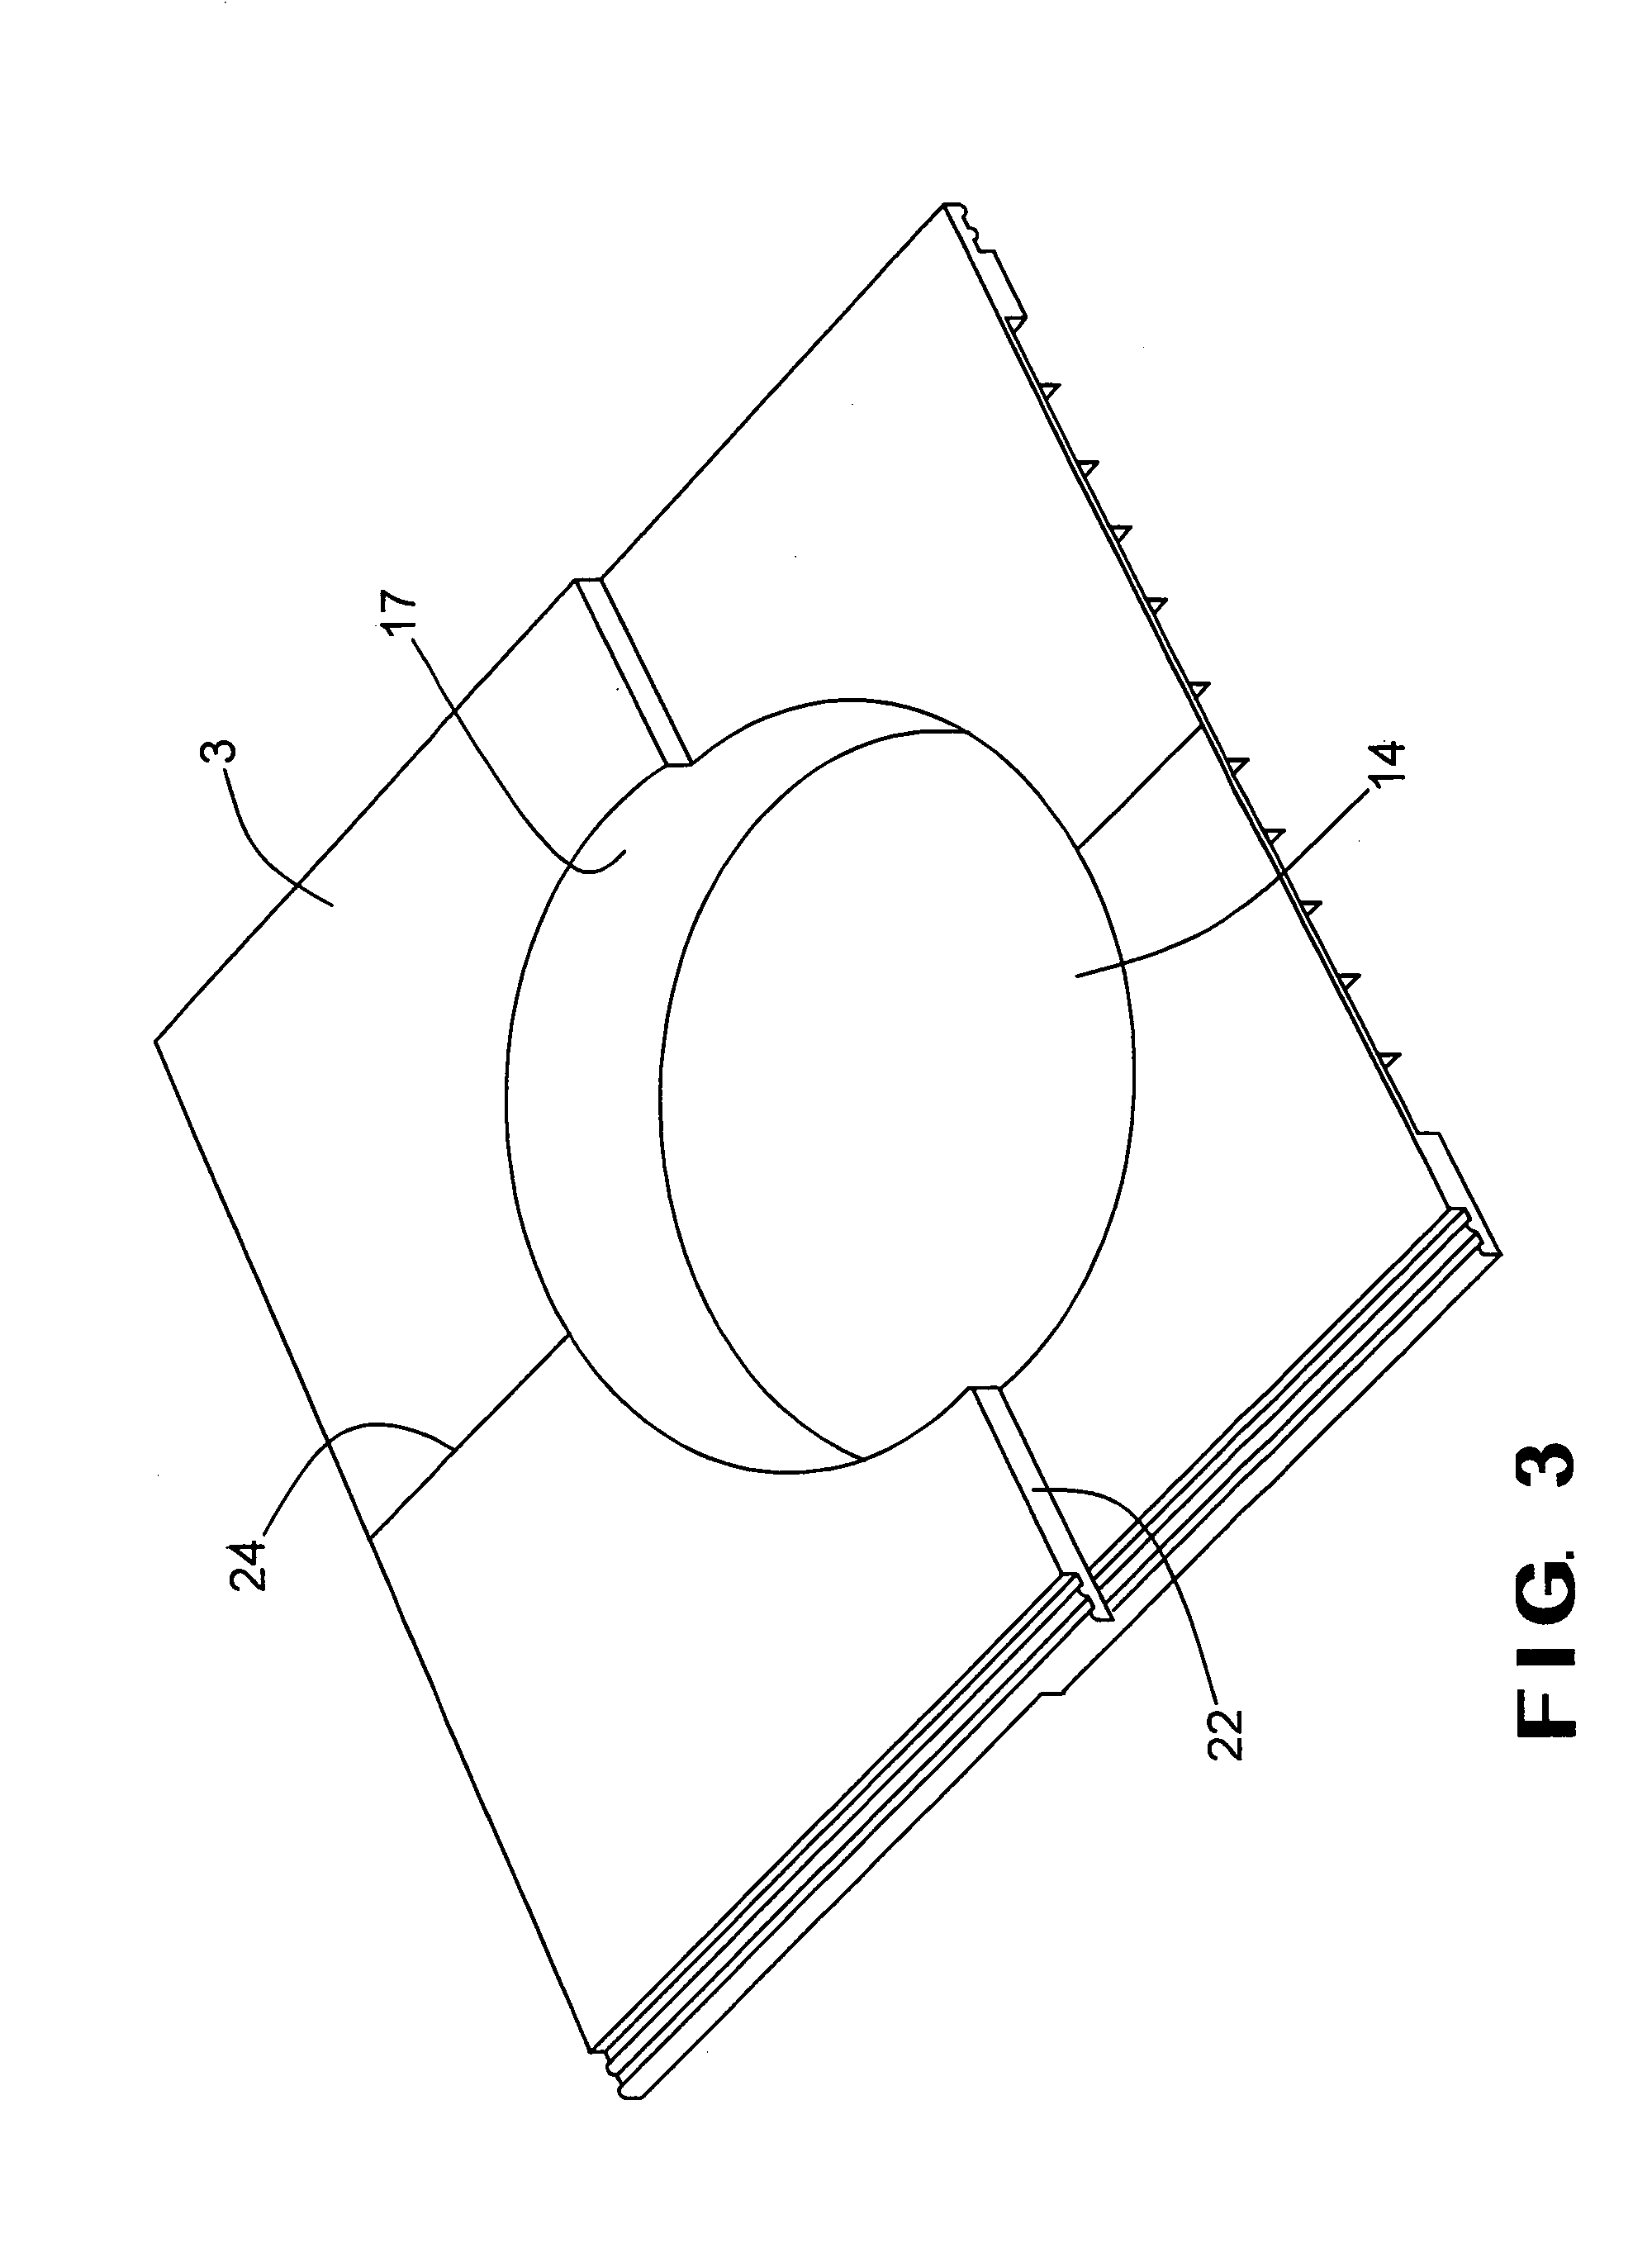 Apparatus for illuminating and/or venting the interior of a building